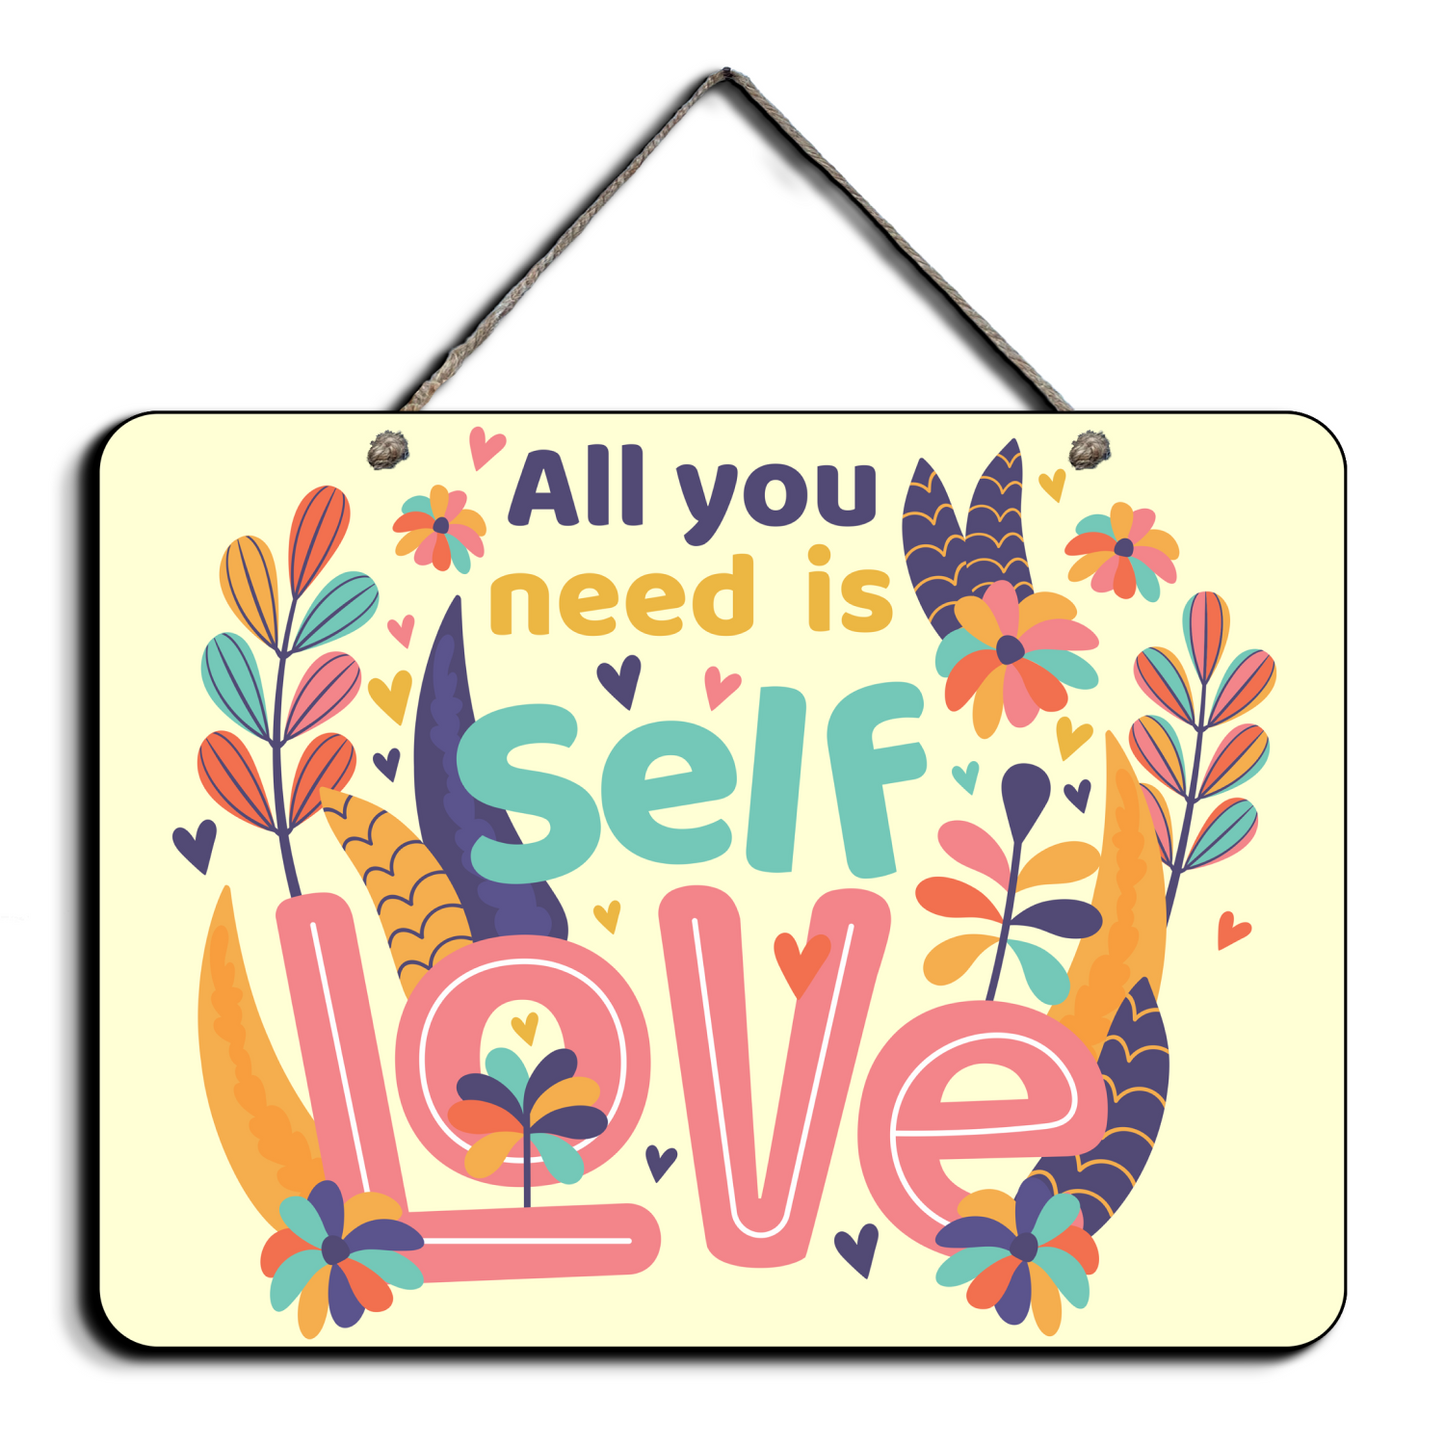 All You Need Is Selflove Wood Print Colorful Wall or Door Hanging